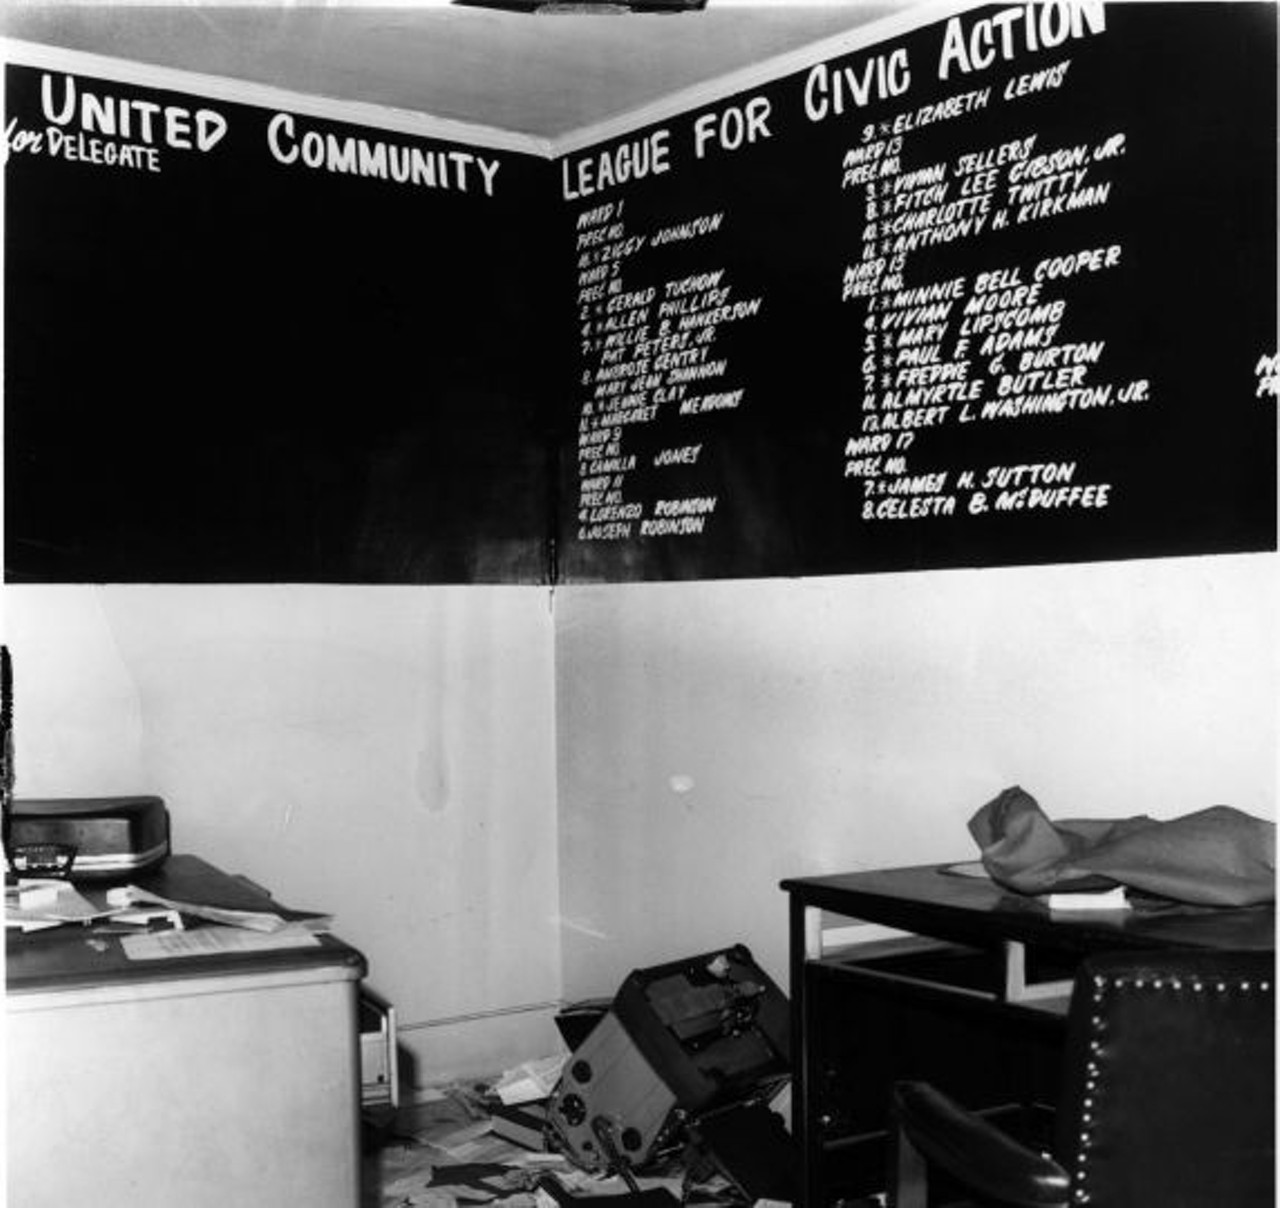 The riots started with a raid on an after-hours bar, known as the United Community League for Civil Action, that operated out of a print shop on 12th Street. A party at the bar was in progress to celebrate the return of two black servicemen from Vietnam.  Officers expected a few patrons to be inside, and instead, found and arrested all 82 people attending the party.  As party attendees were being transported from the scene by police, a crowd of about 200 people gathered outside agitated by rumors that police used excessive force during the raid.